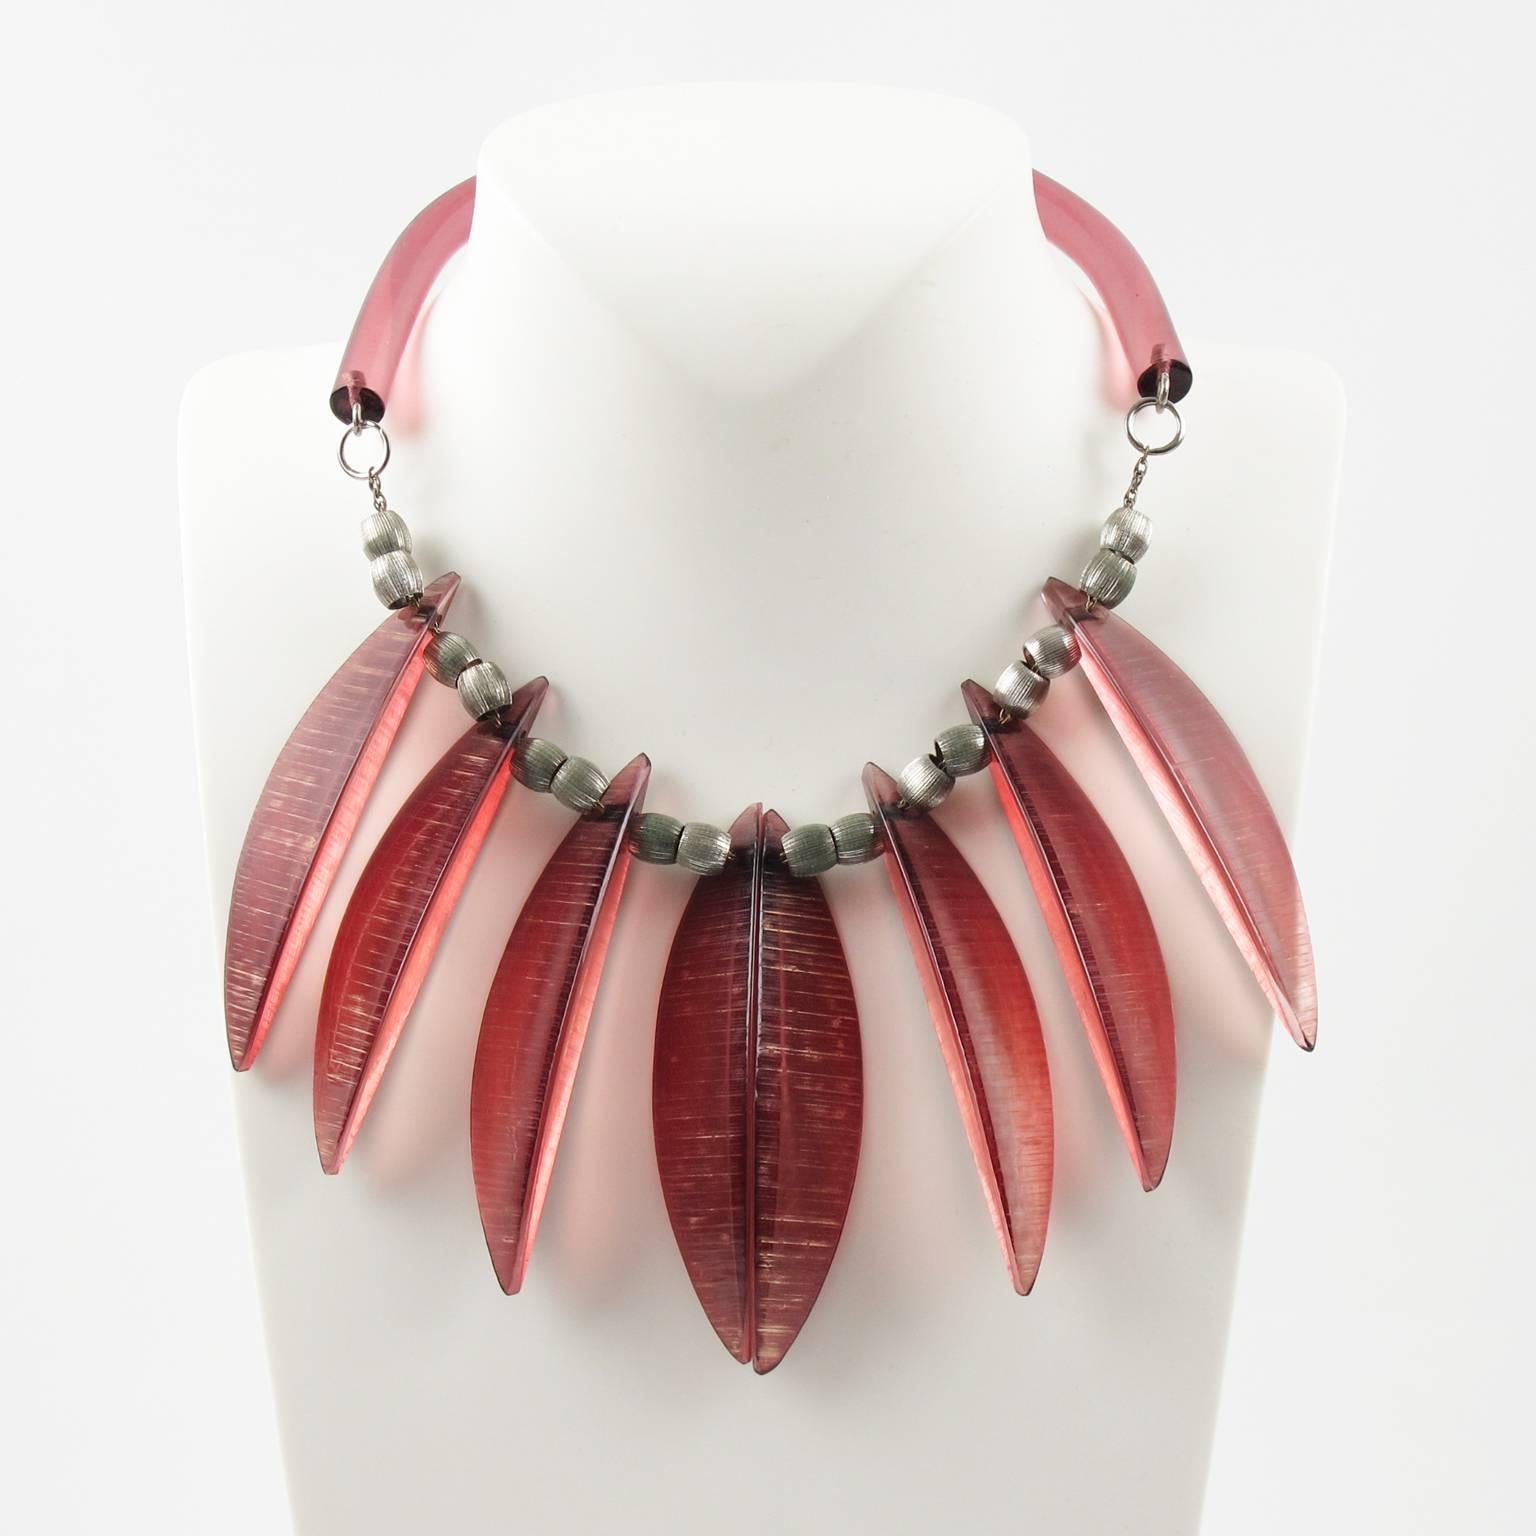 Fabulous vintage stunning piece of art by Judith Hendler. This necklace is from the 80's. It has the iconic acrylic - lucite neck tube ring and from it are the fabulous feather-like acri-gems hanging from silver plate twisted chain. The feathers are